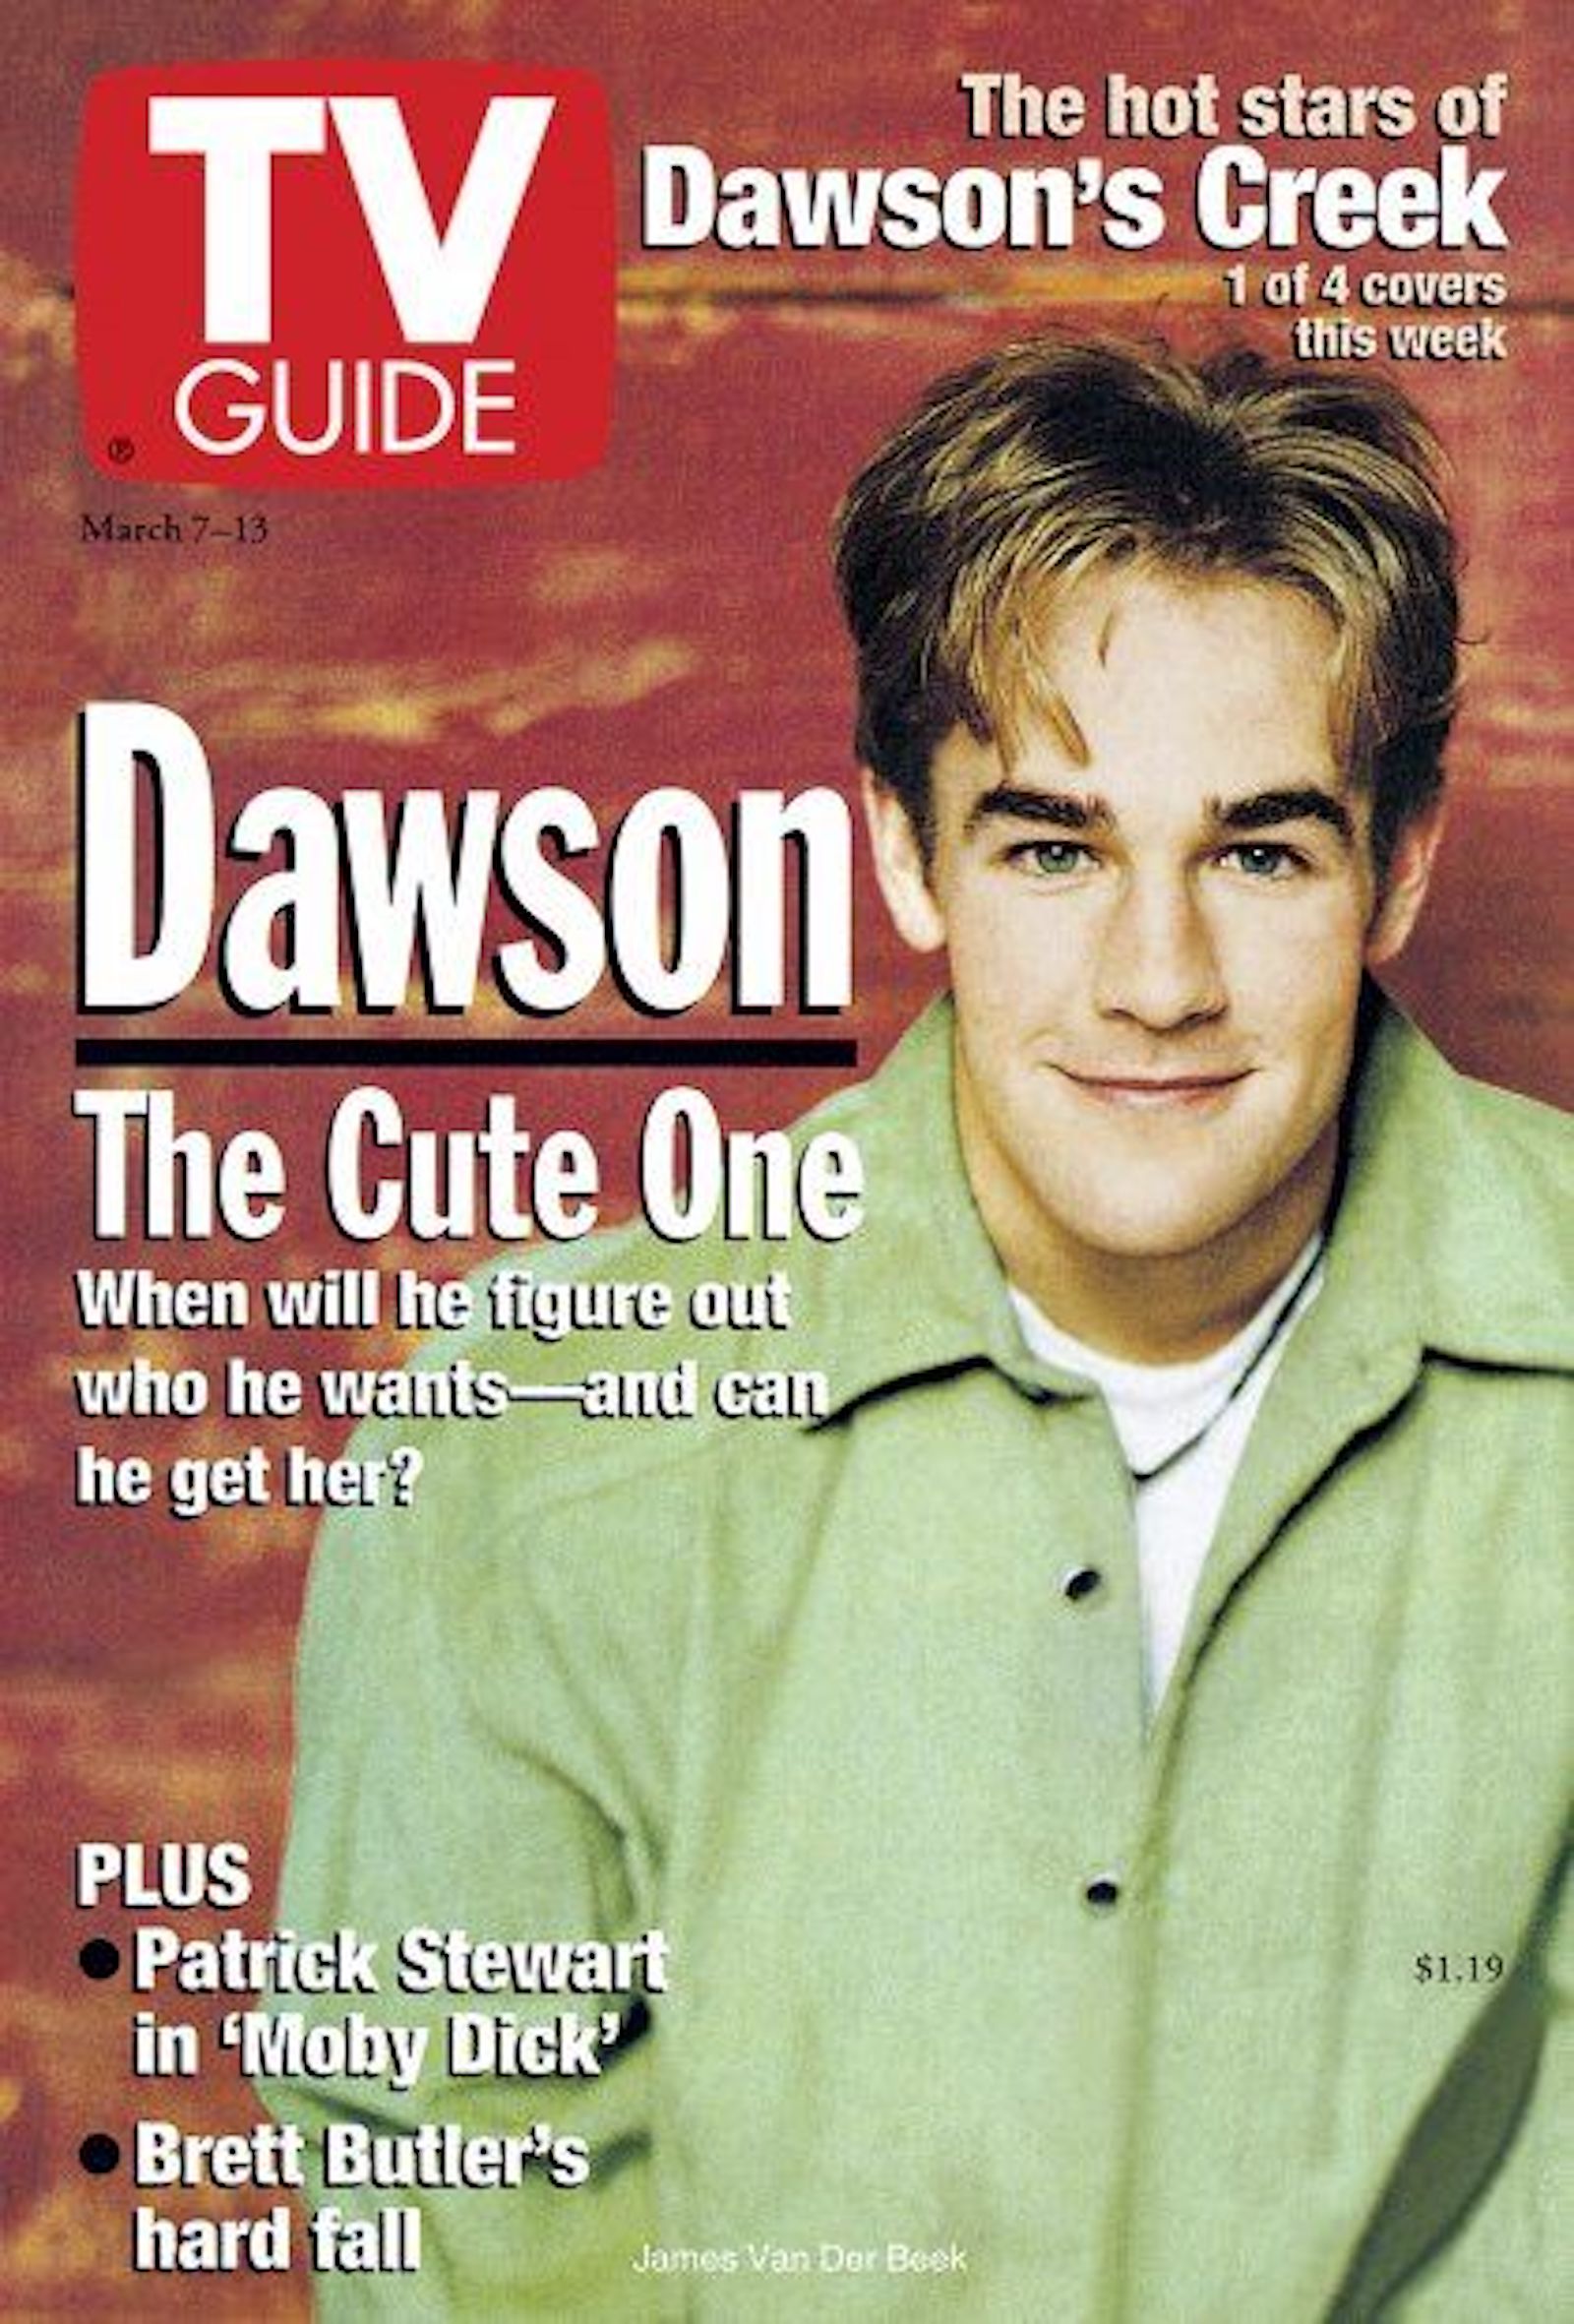 James Van Der Beek of Dawson's Creek on the cover of TV Guide Magazine